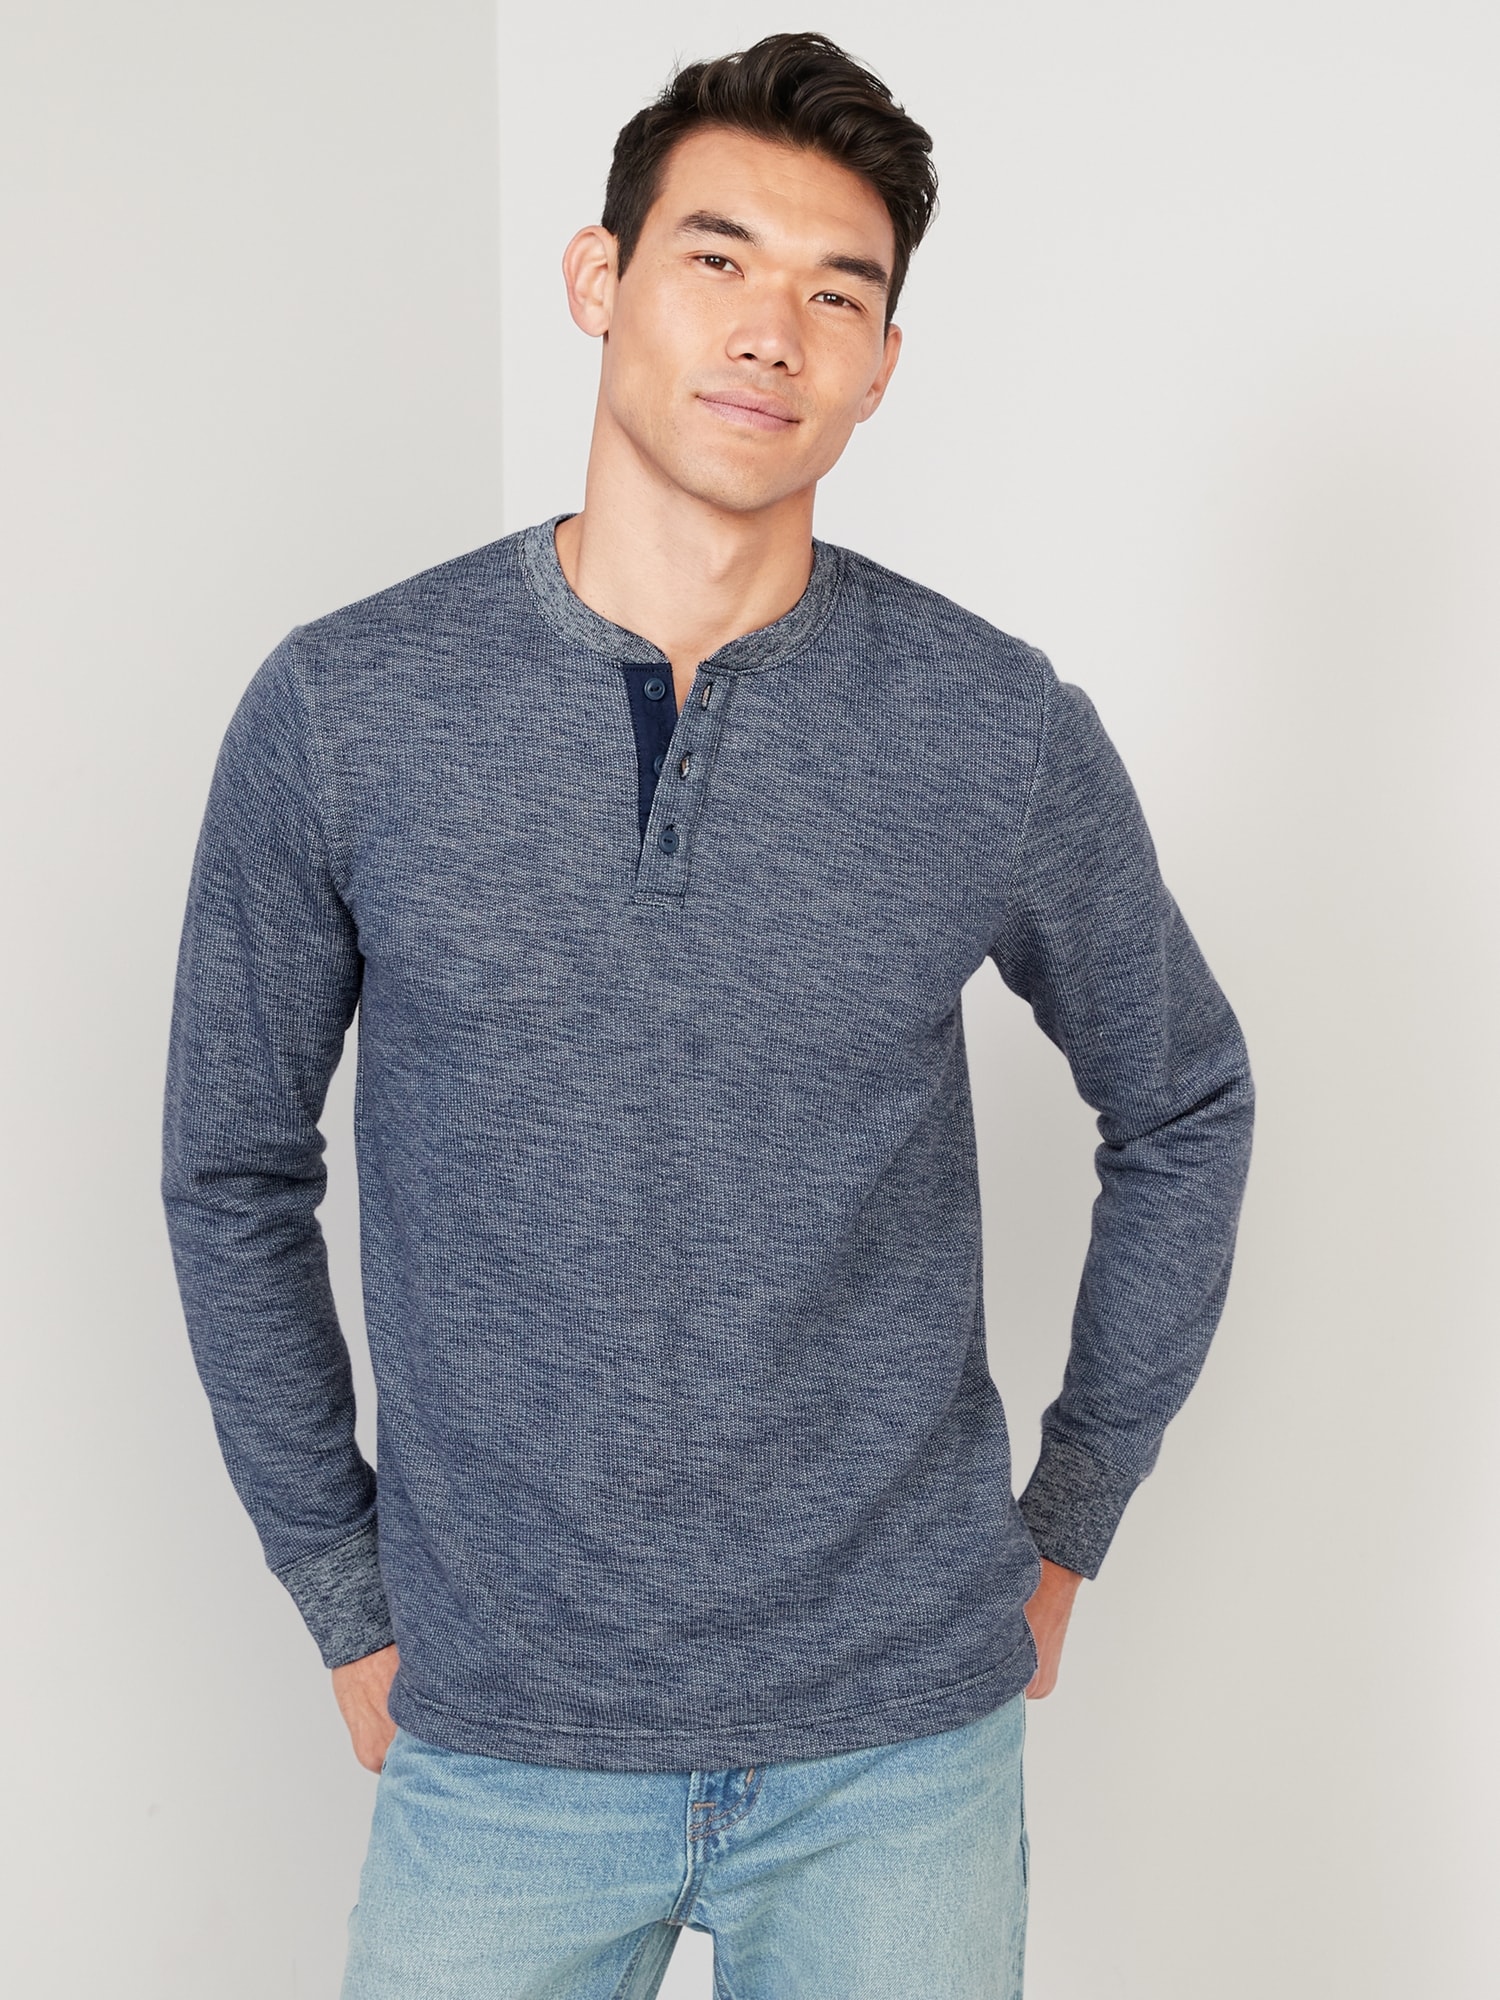 Cozy-Knit Long-Sleeve Henley T-Shirt for Men | Old Navy